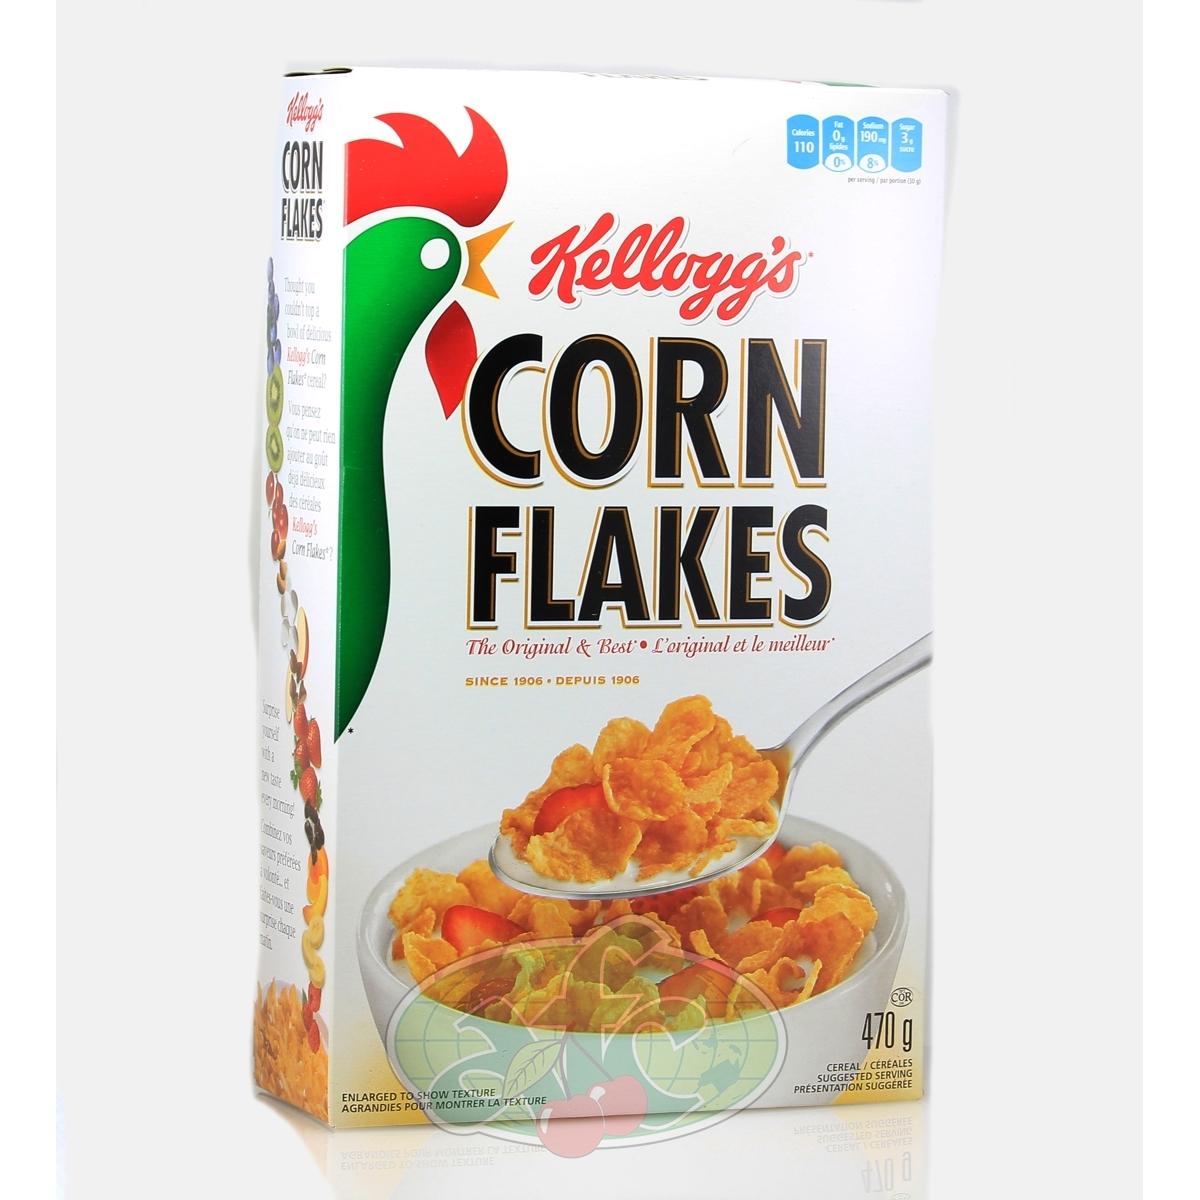 Kellogg's Corn Flakes Kellogg's Corn Flakes Flakes Asian Food Centre